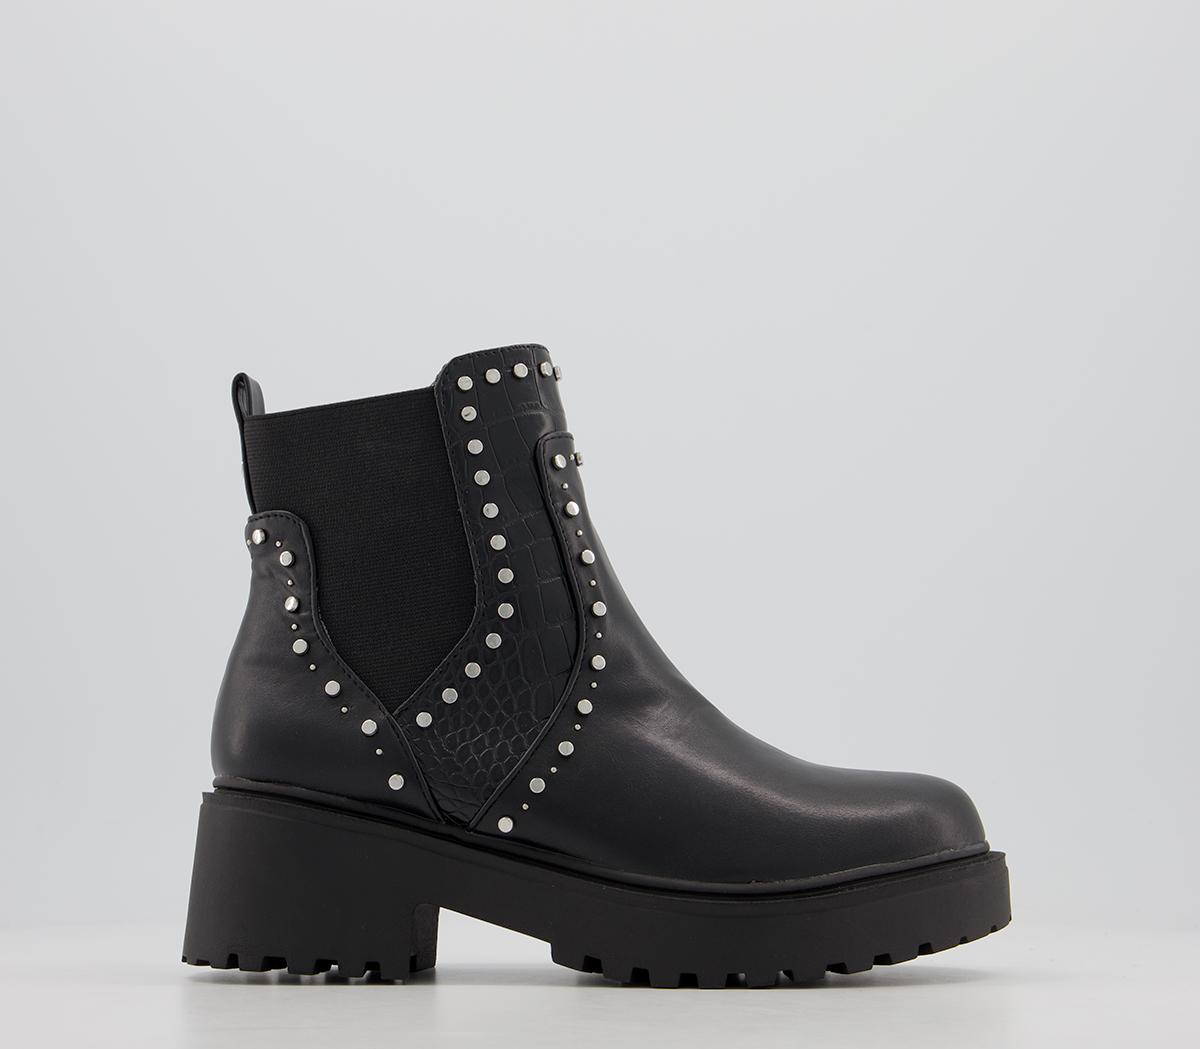 OFFICEAbove Studded Chelsea Ankle BootsBlack With Studs